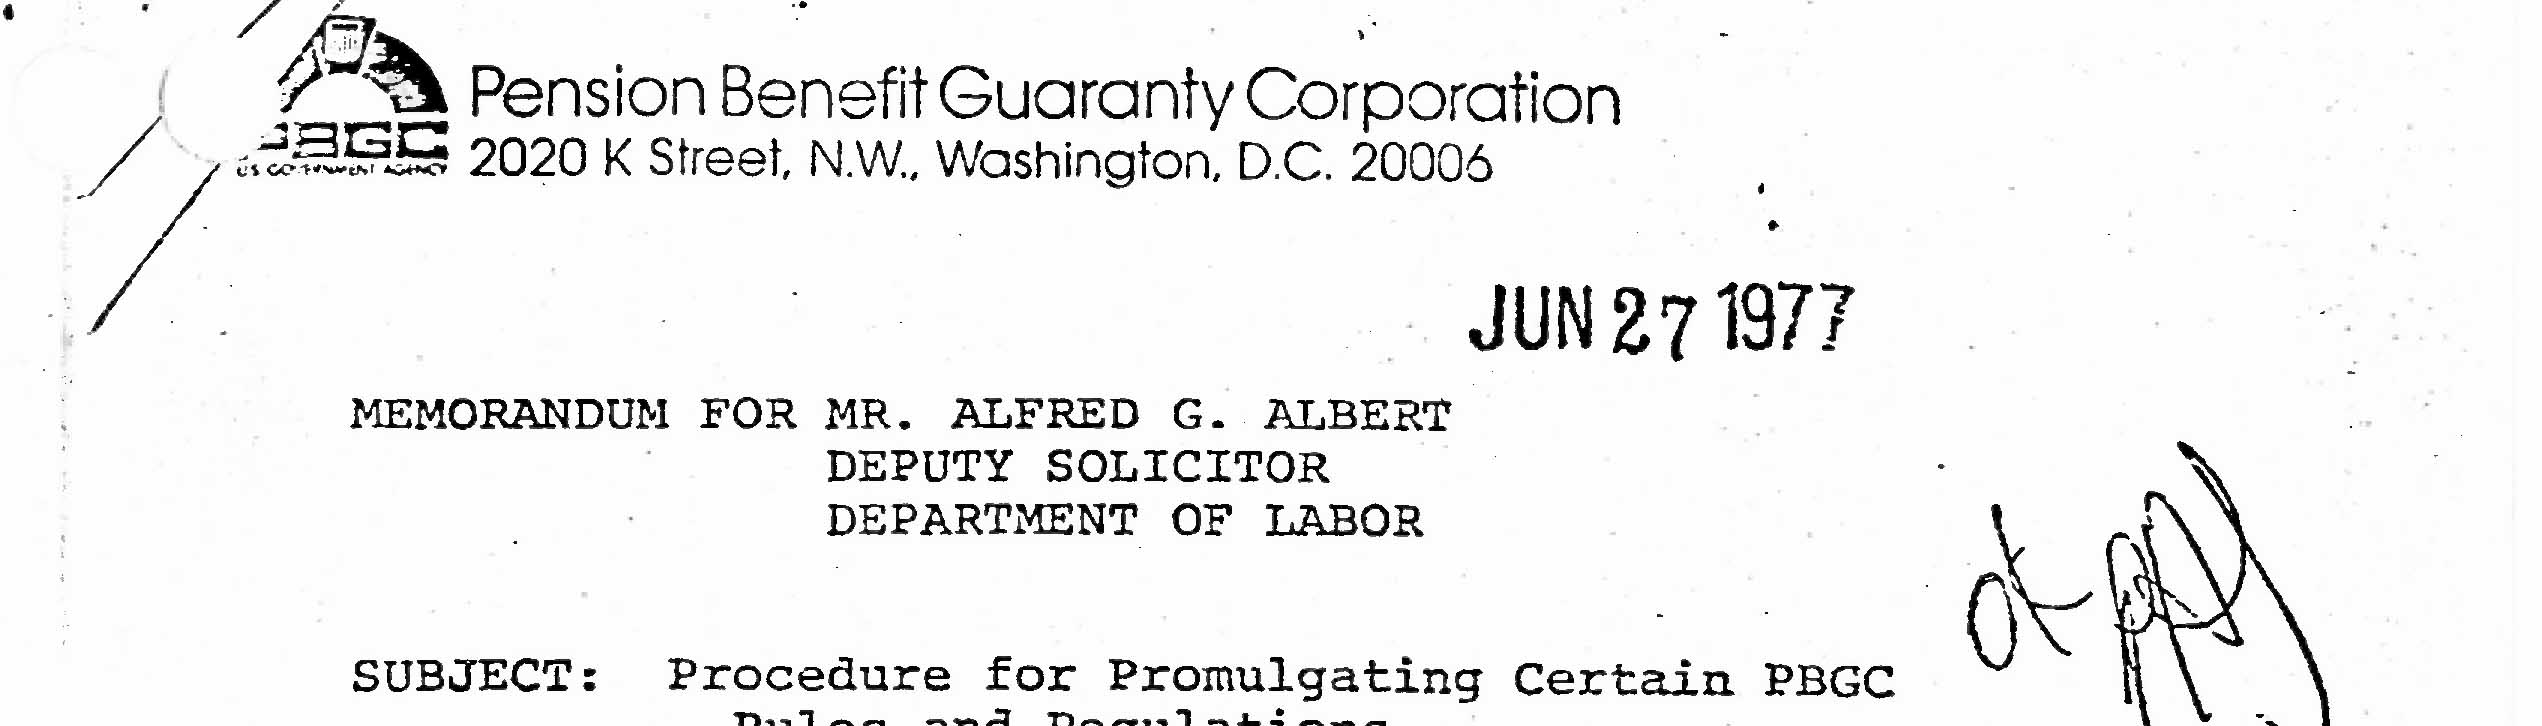 Records of the Pension Benefit Guaranty Corporation